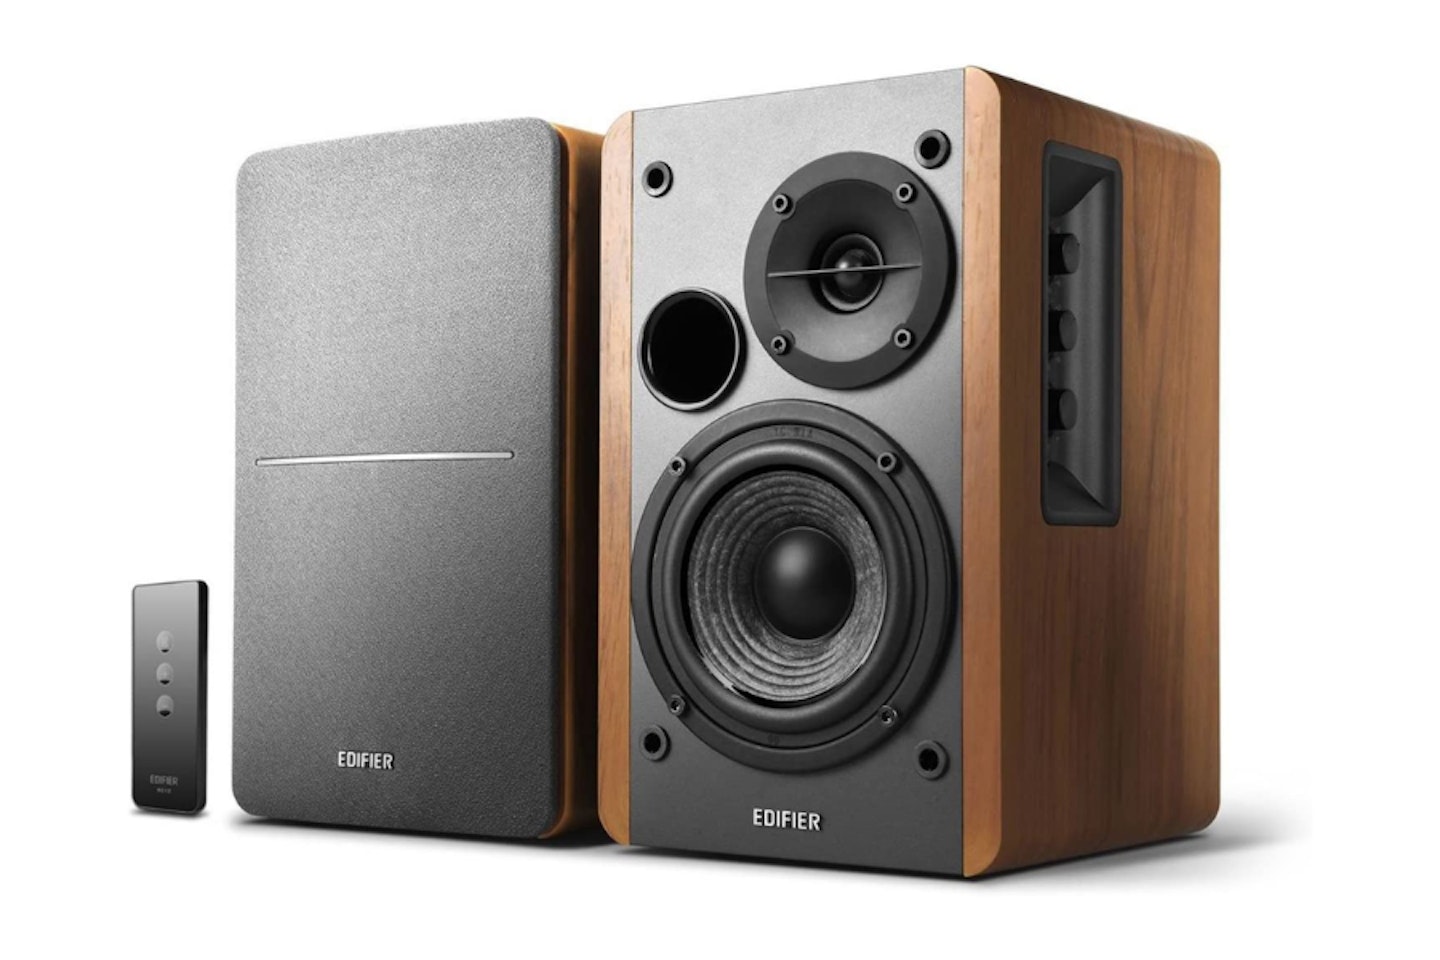 Edifier R1280T Active Bookshelf Speakers- one of the best speakers for music